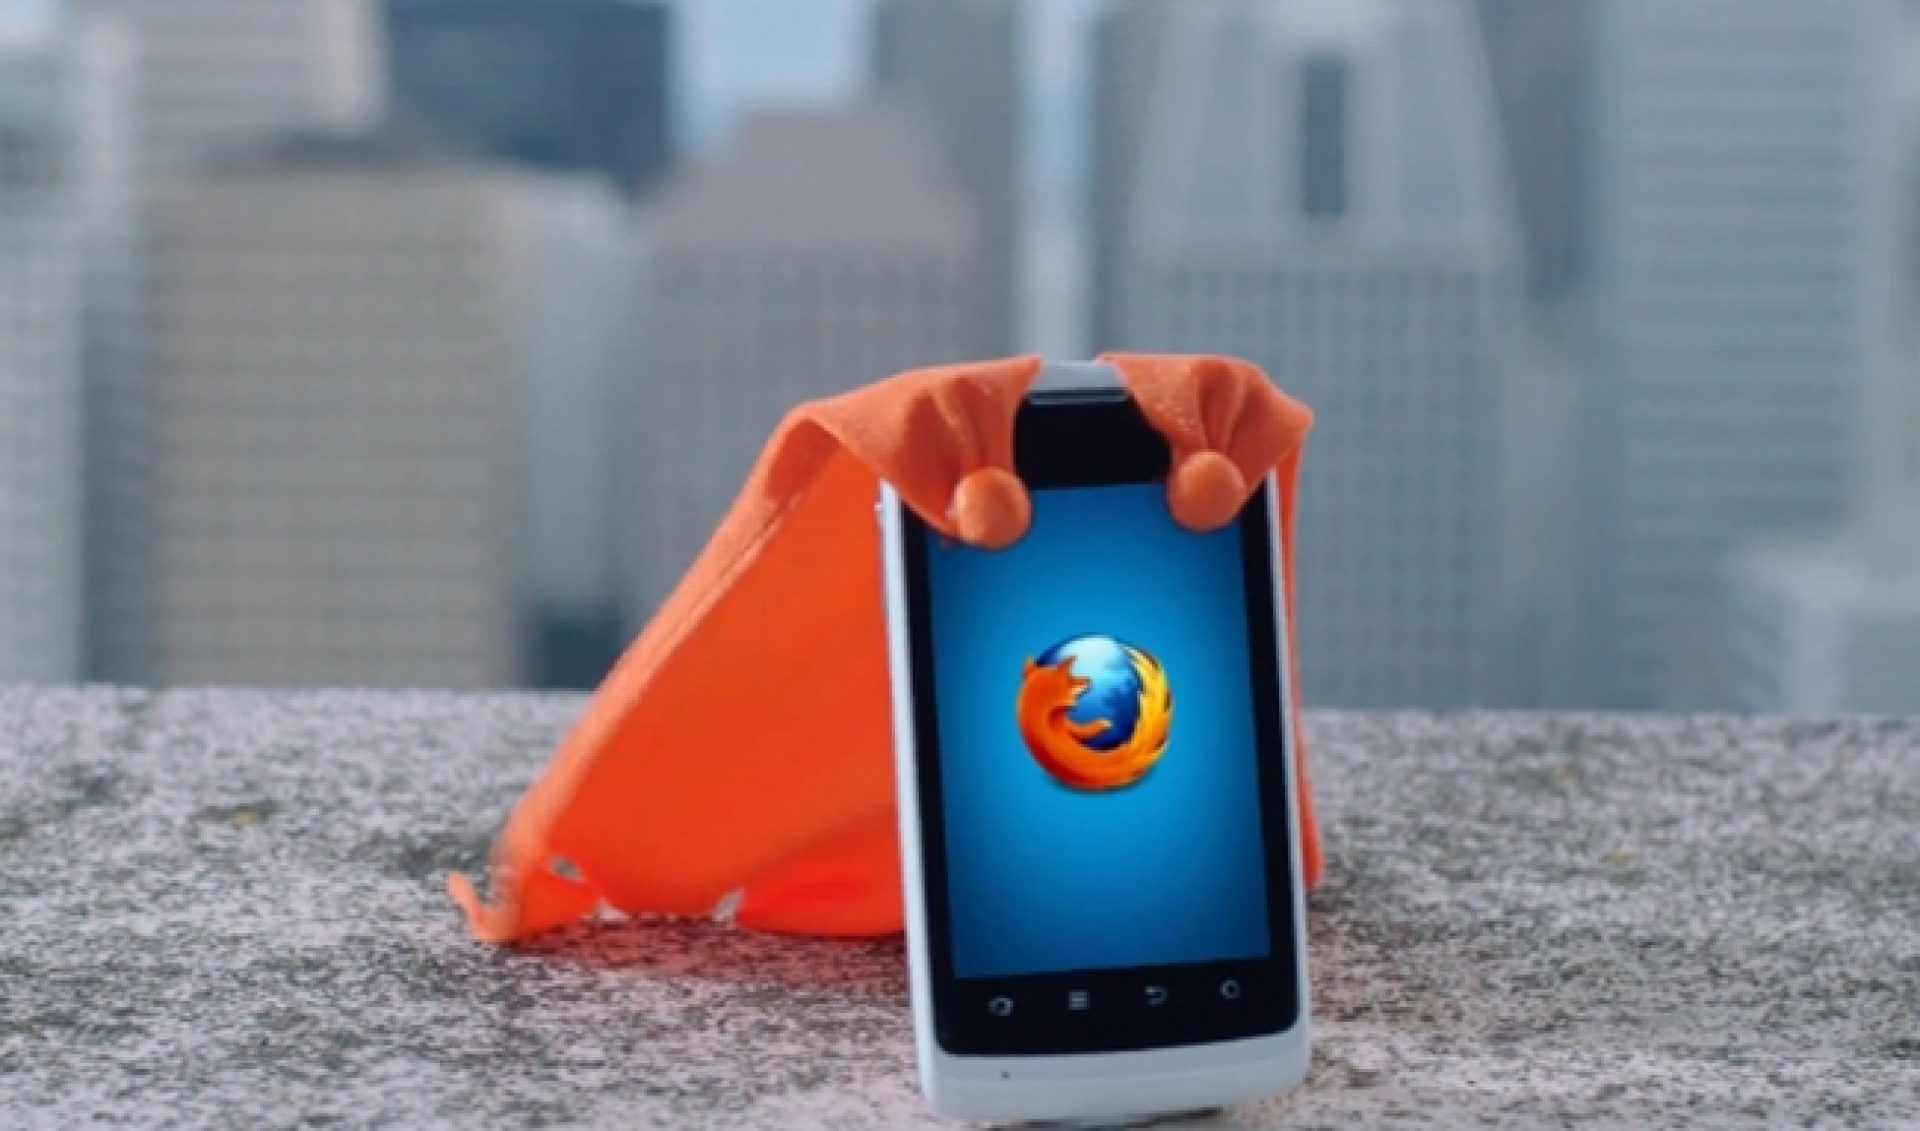 Firefox (And Edward Norton) To Judge Short Films About Power Of Mobile